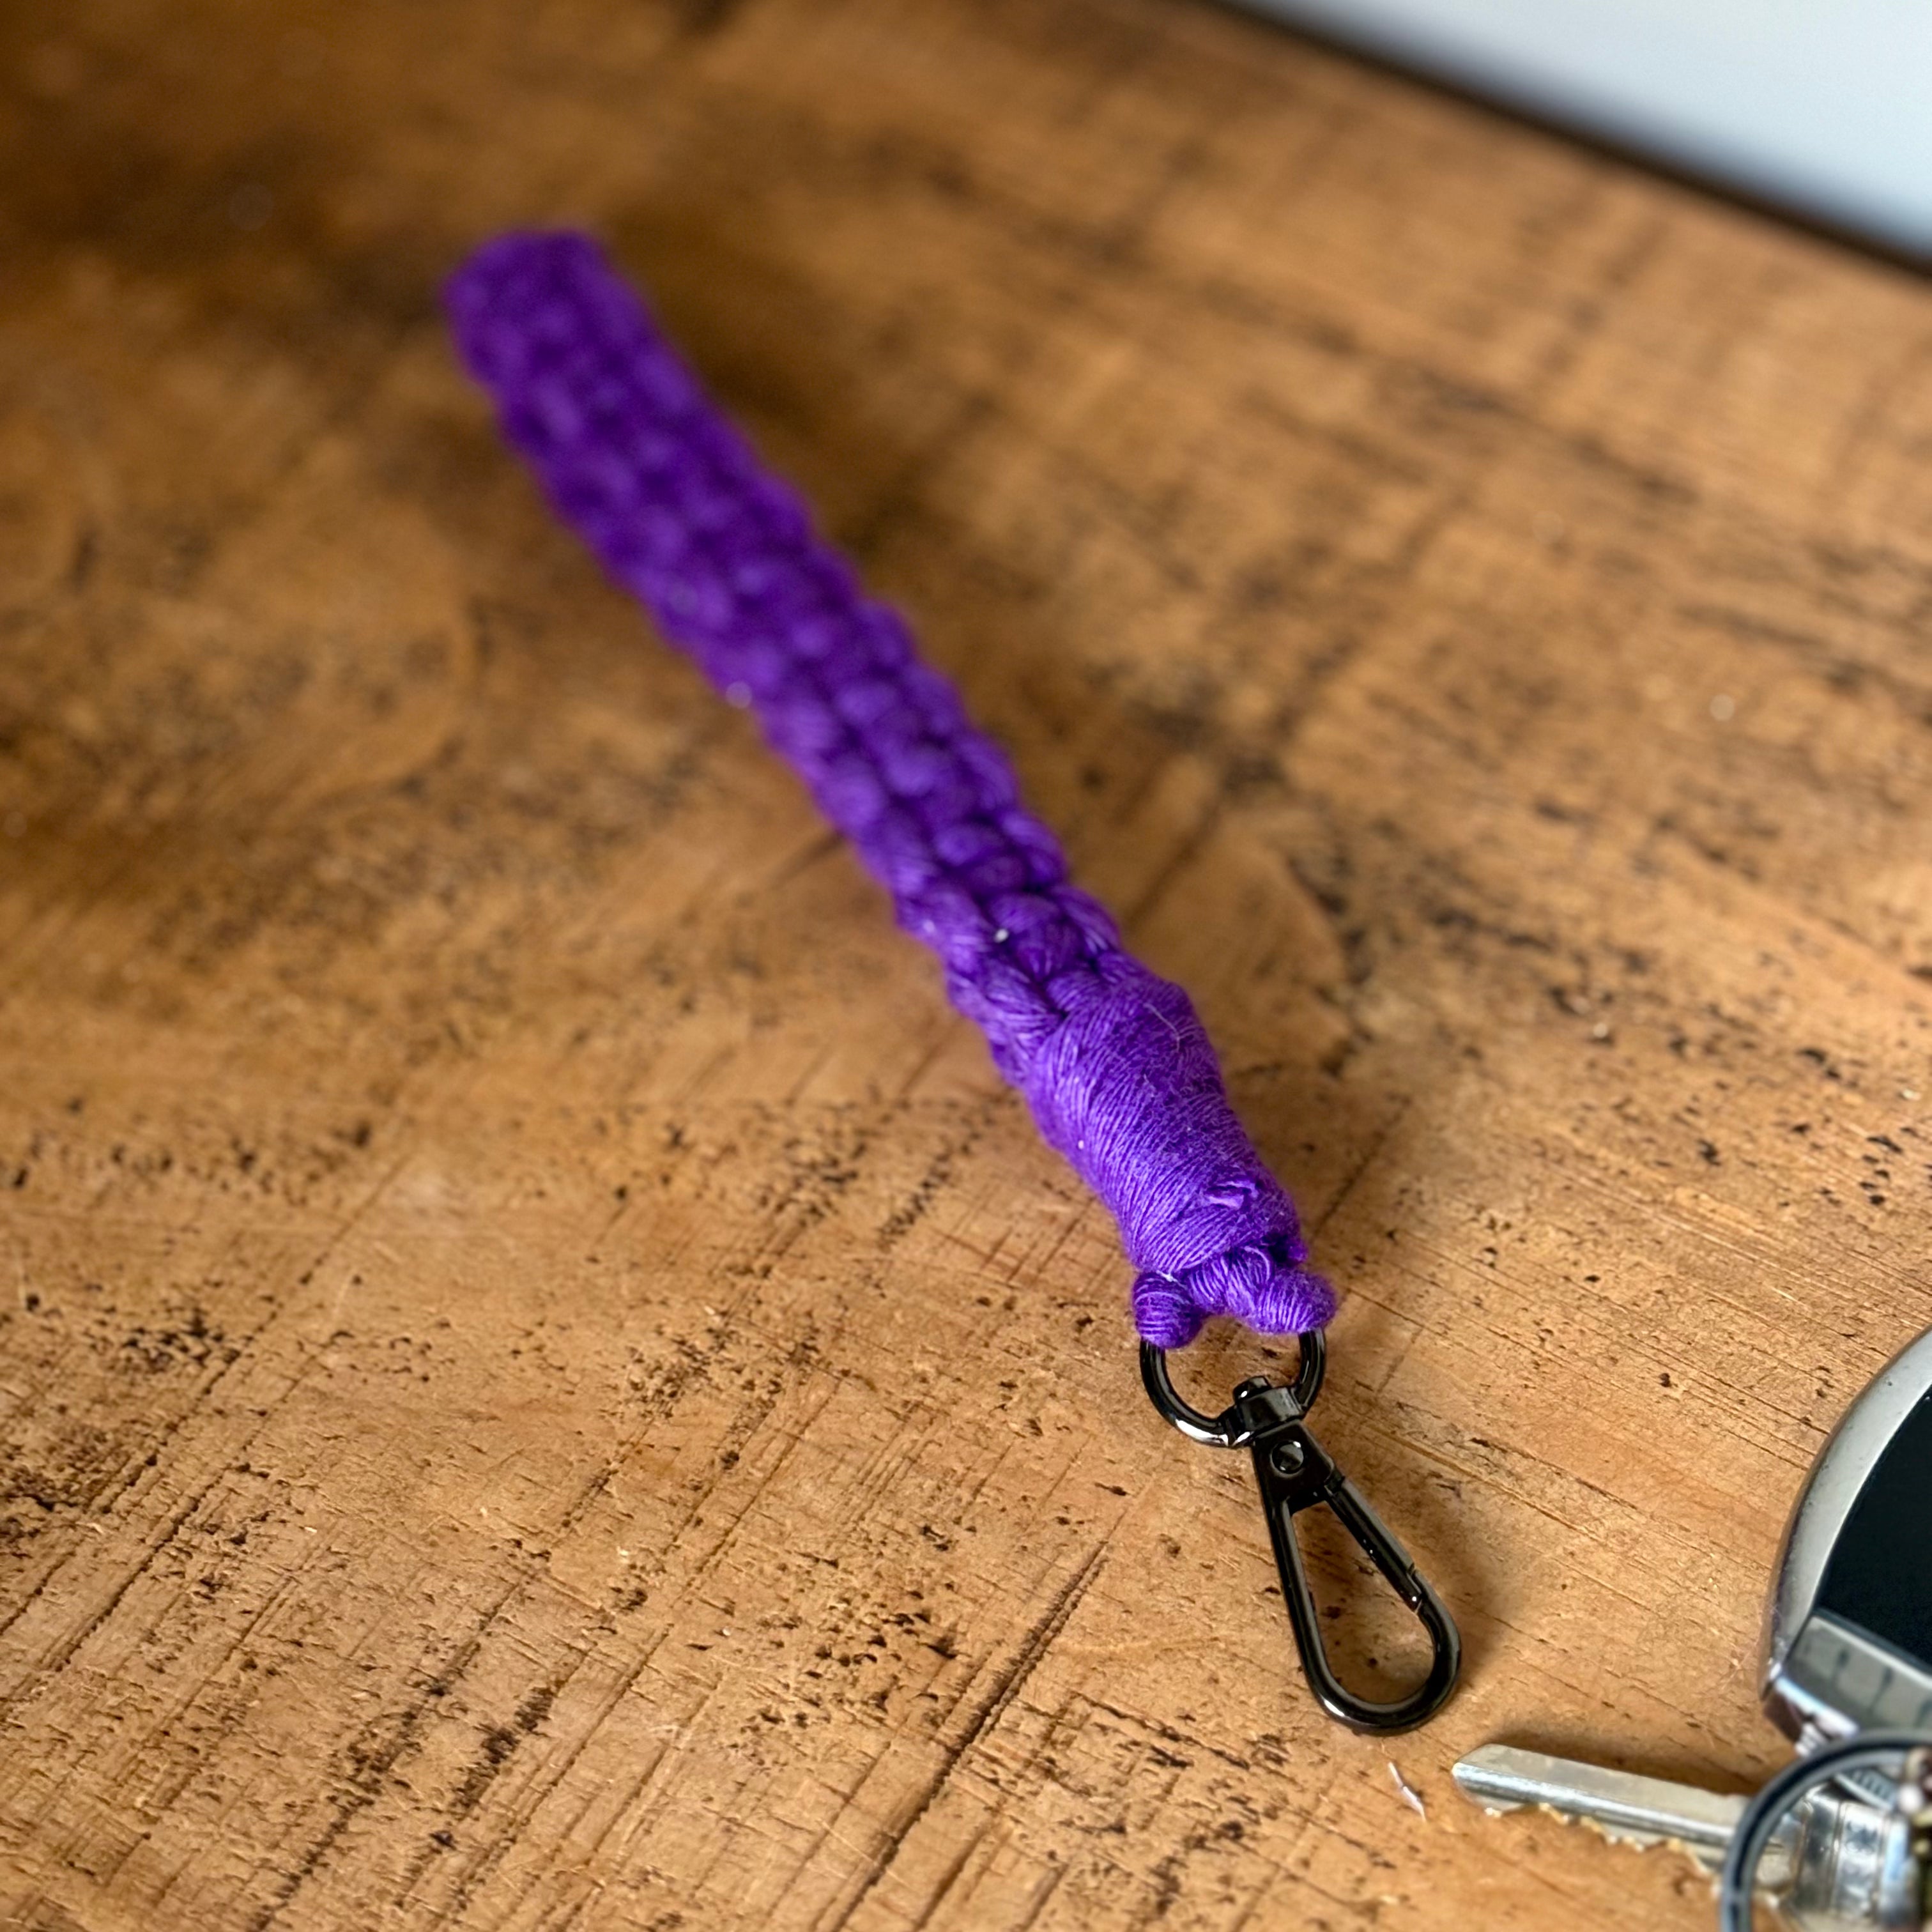 Limited Edition Tranquillity Macramé Key Ring in Sugar Plum Sparkle handmade in a premium soft cotton yarn with gunmetal hardware